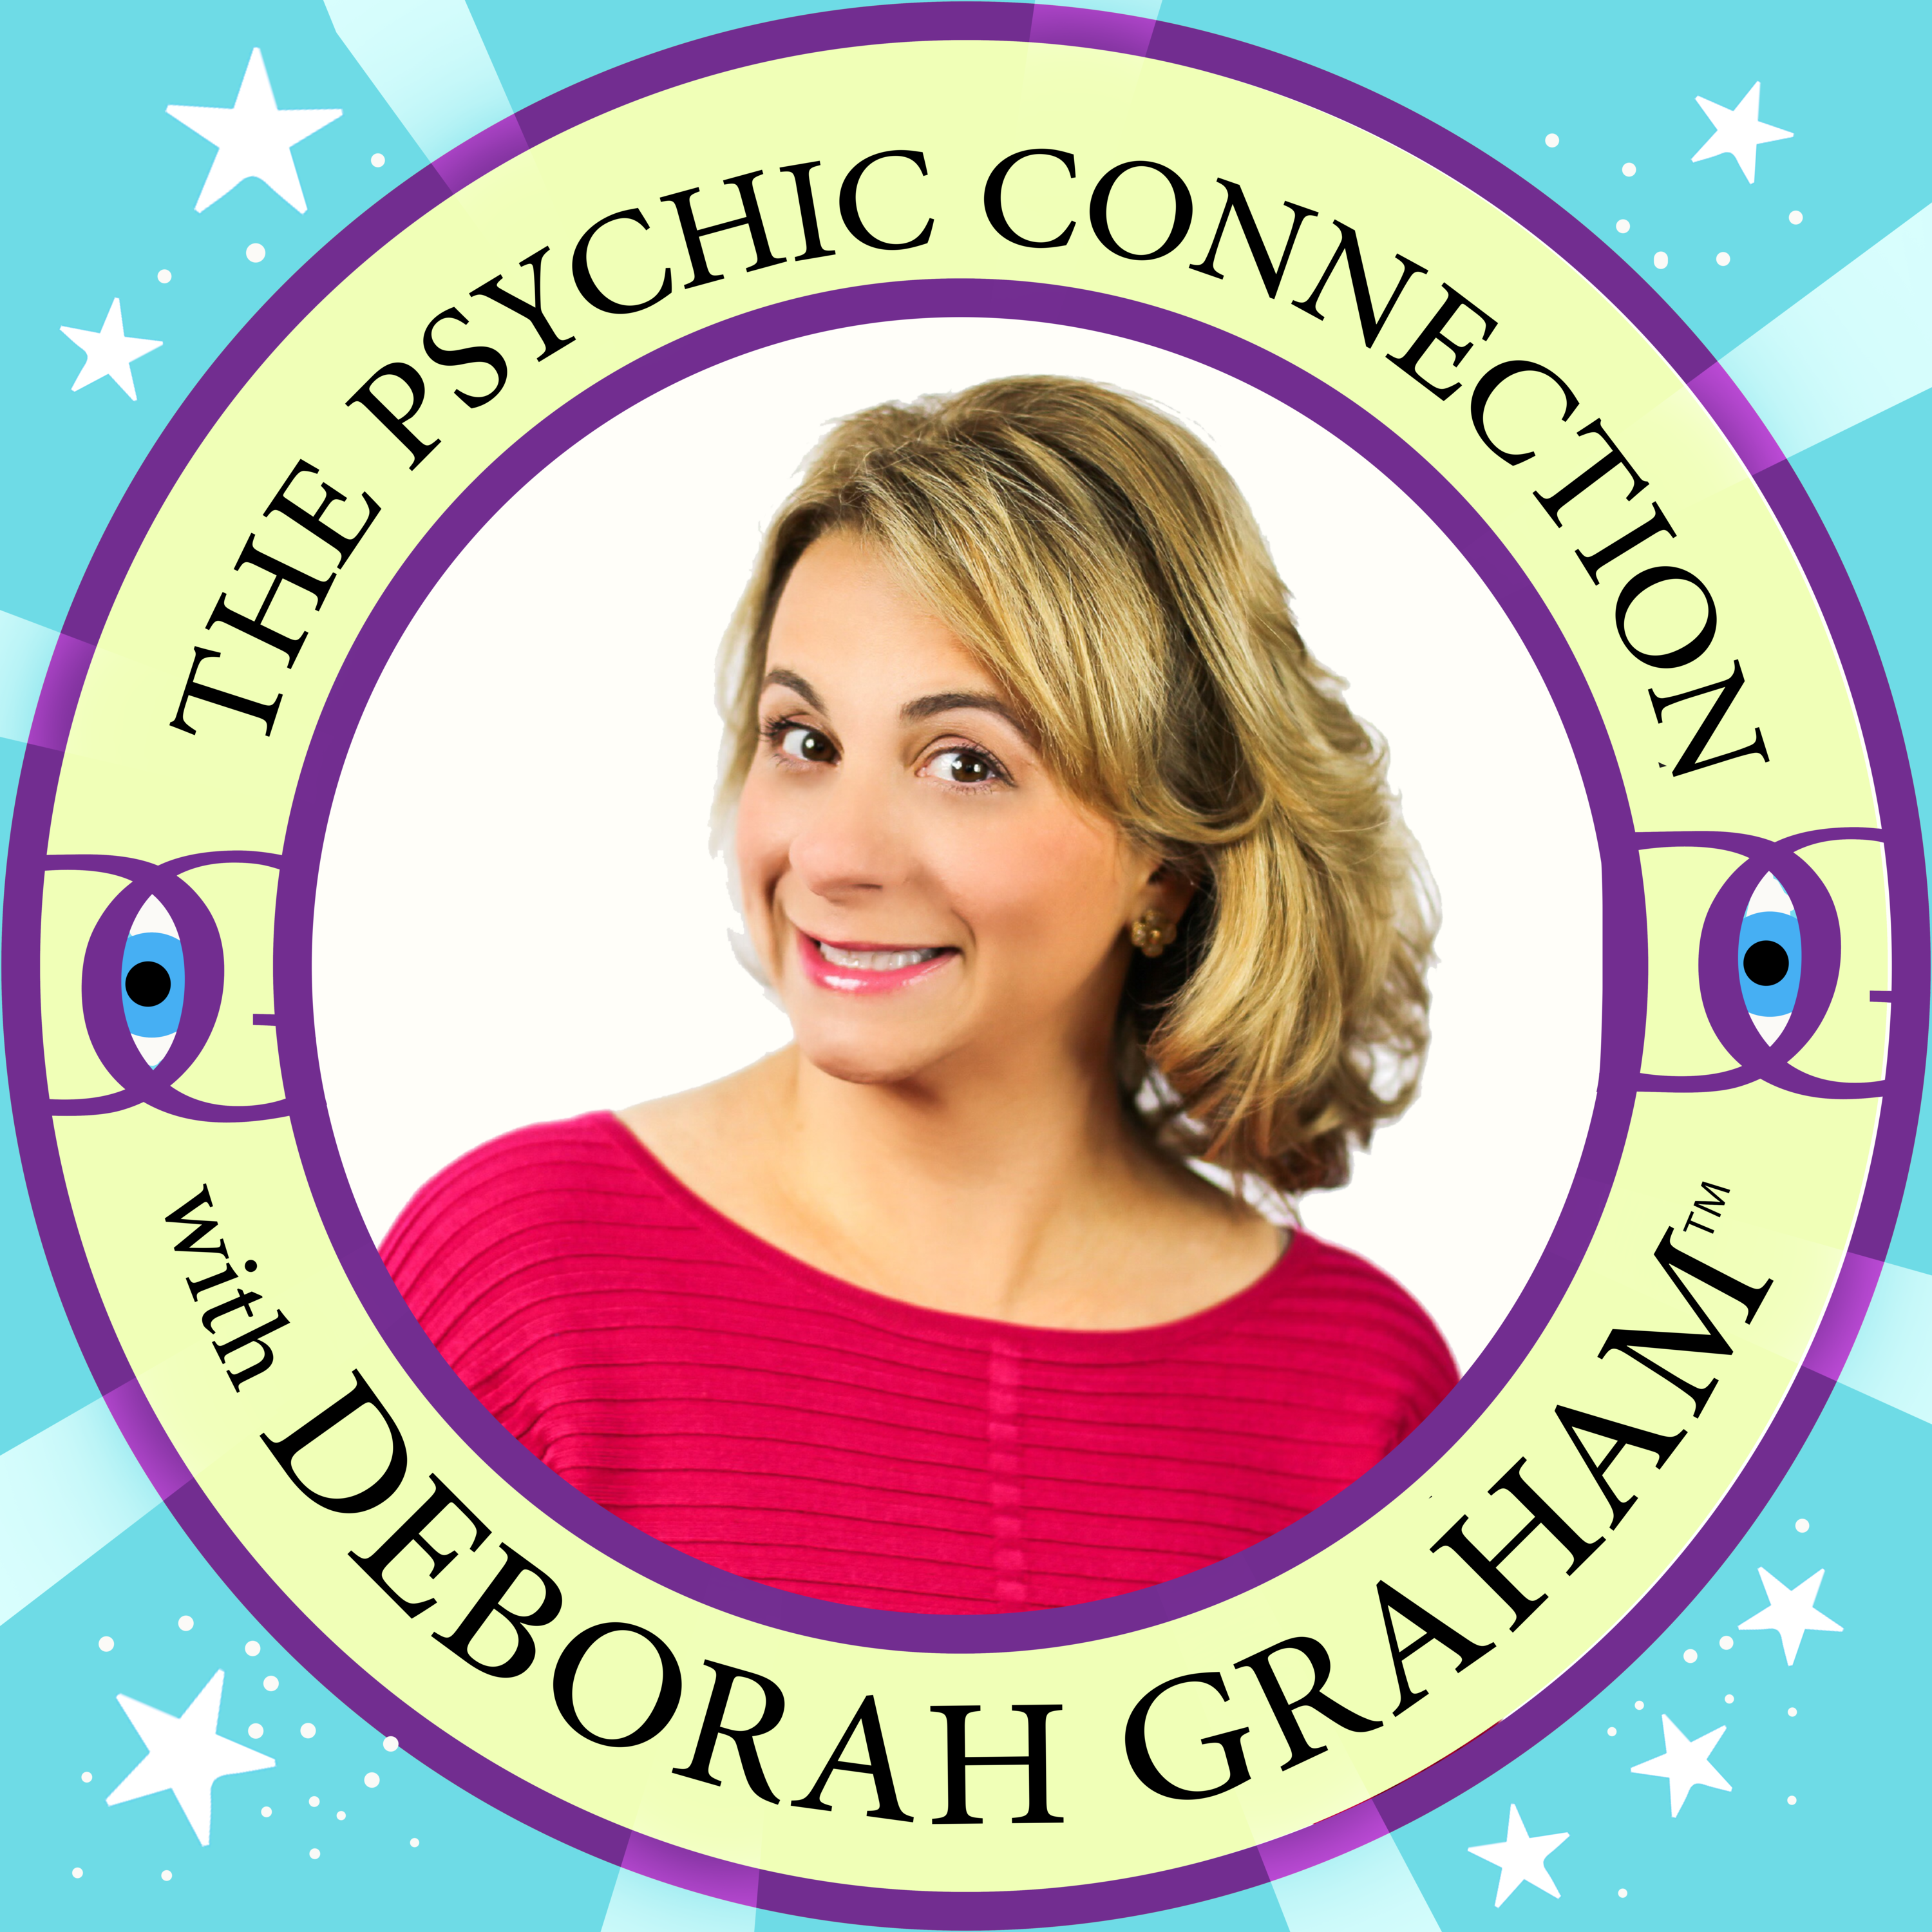 Welcome to Psychic Connection with Deborah Graham